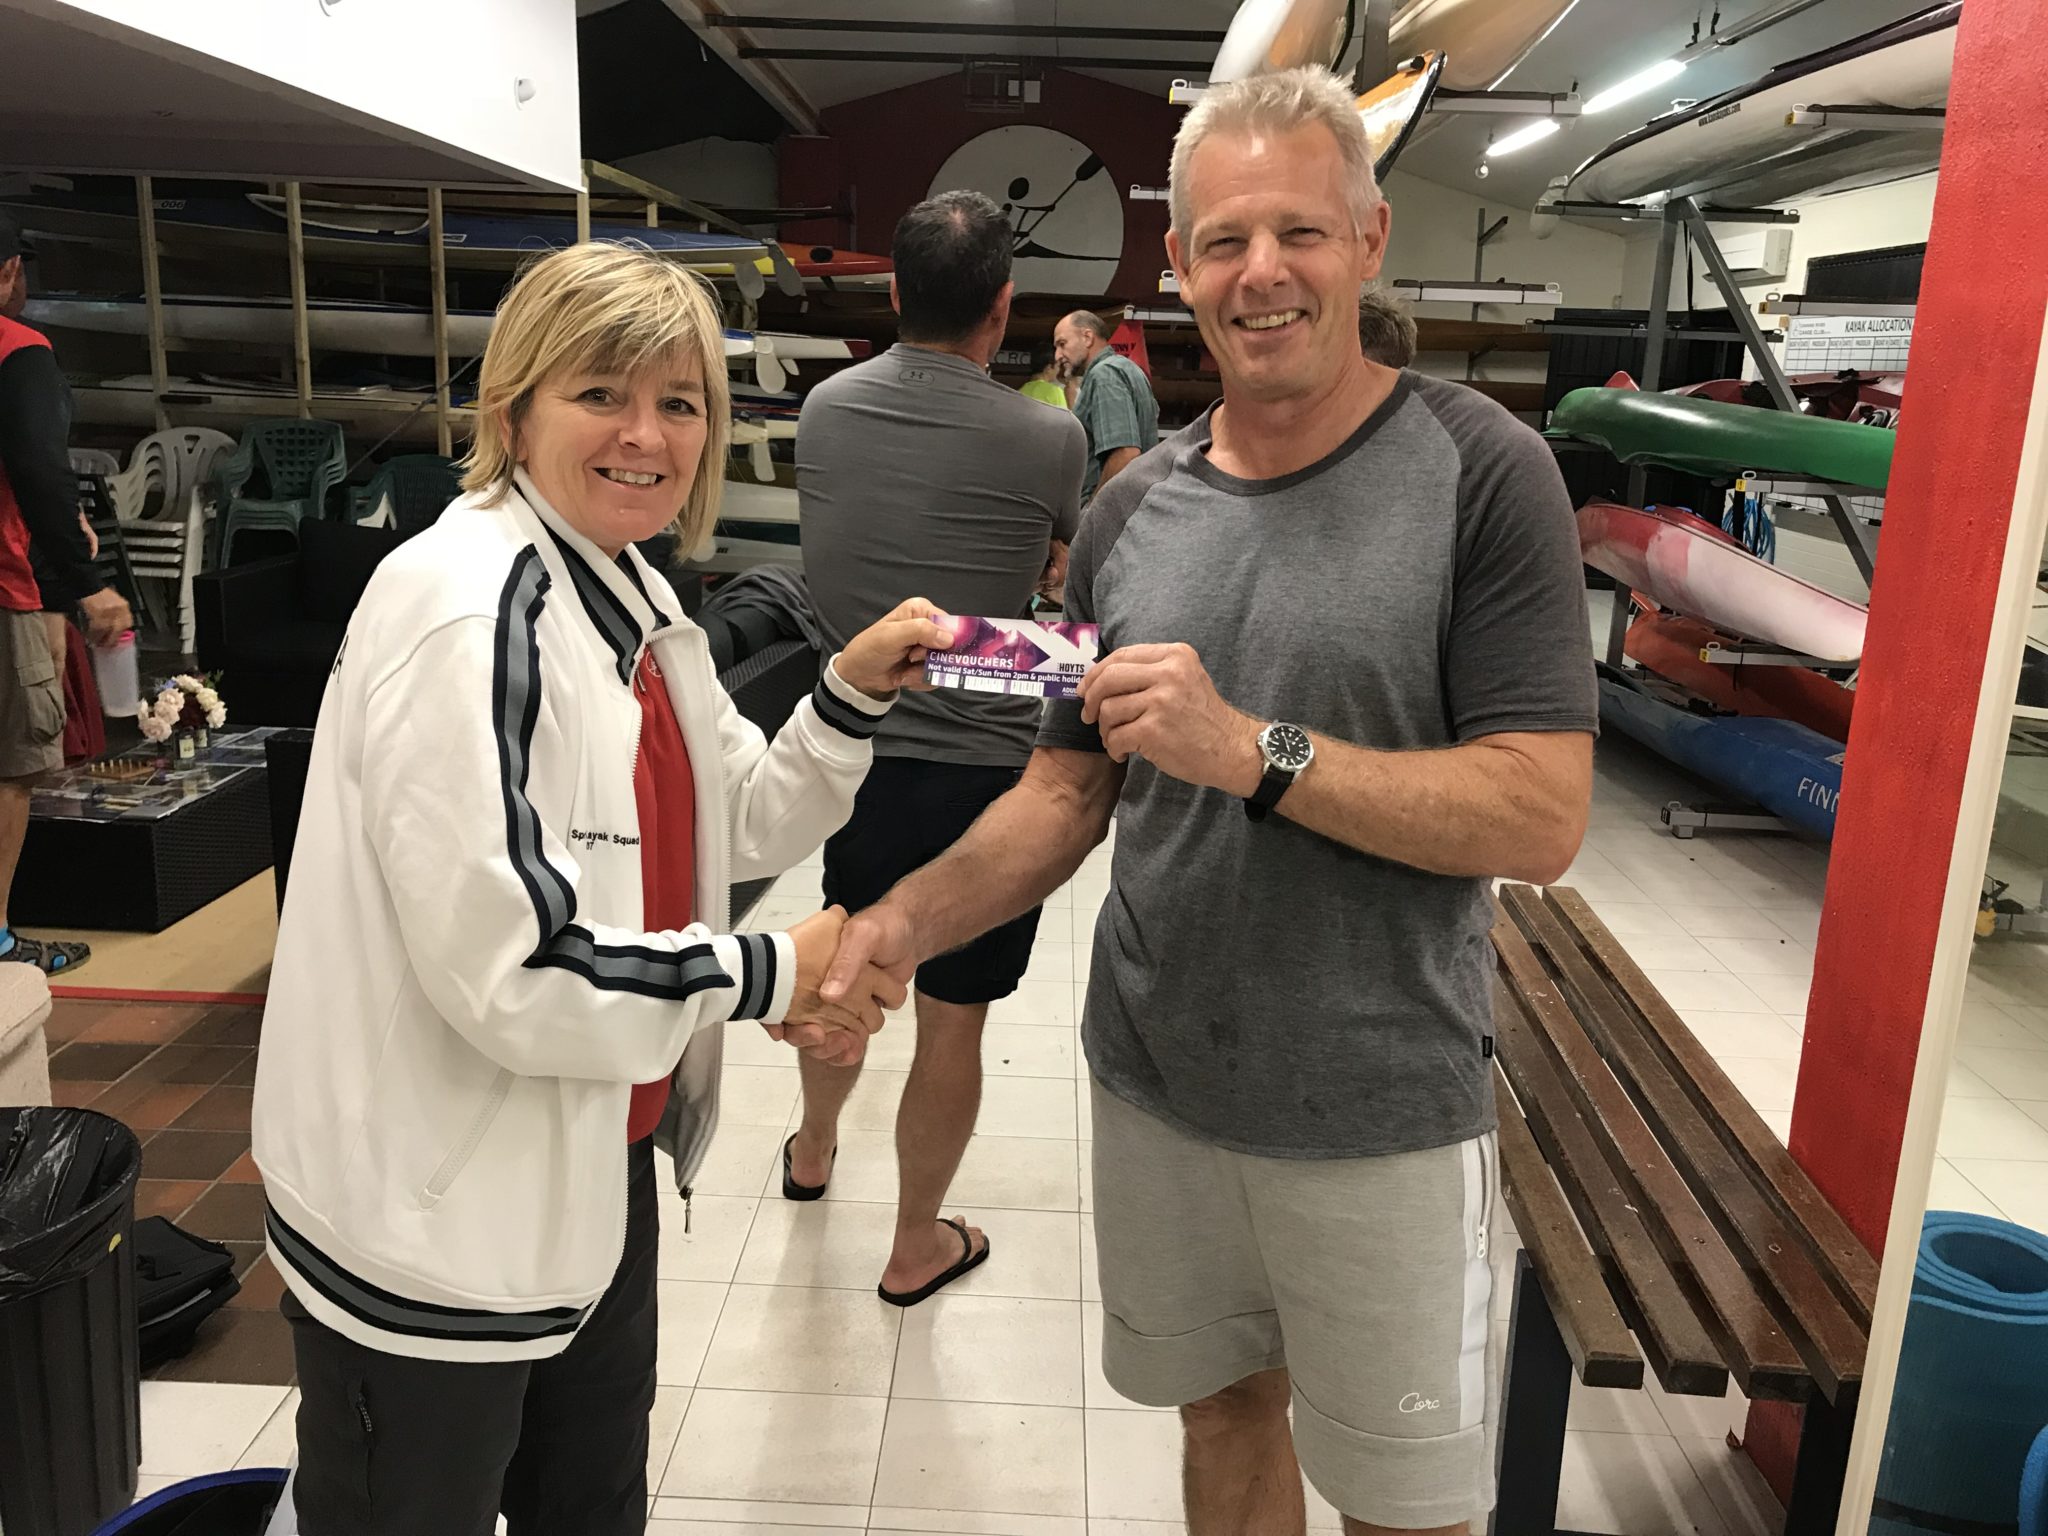 Tues 21st November 2017 : Tonight's photo shows Club Secretary Judith Thompson presenting Gary with a movie voucher.